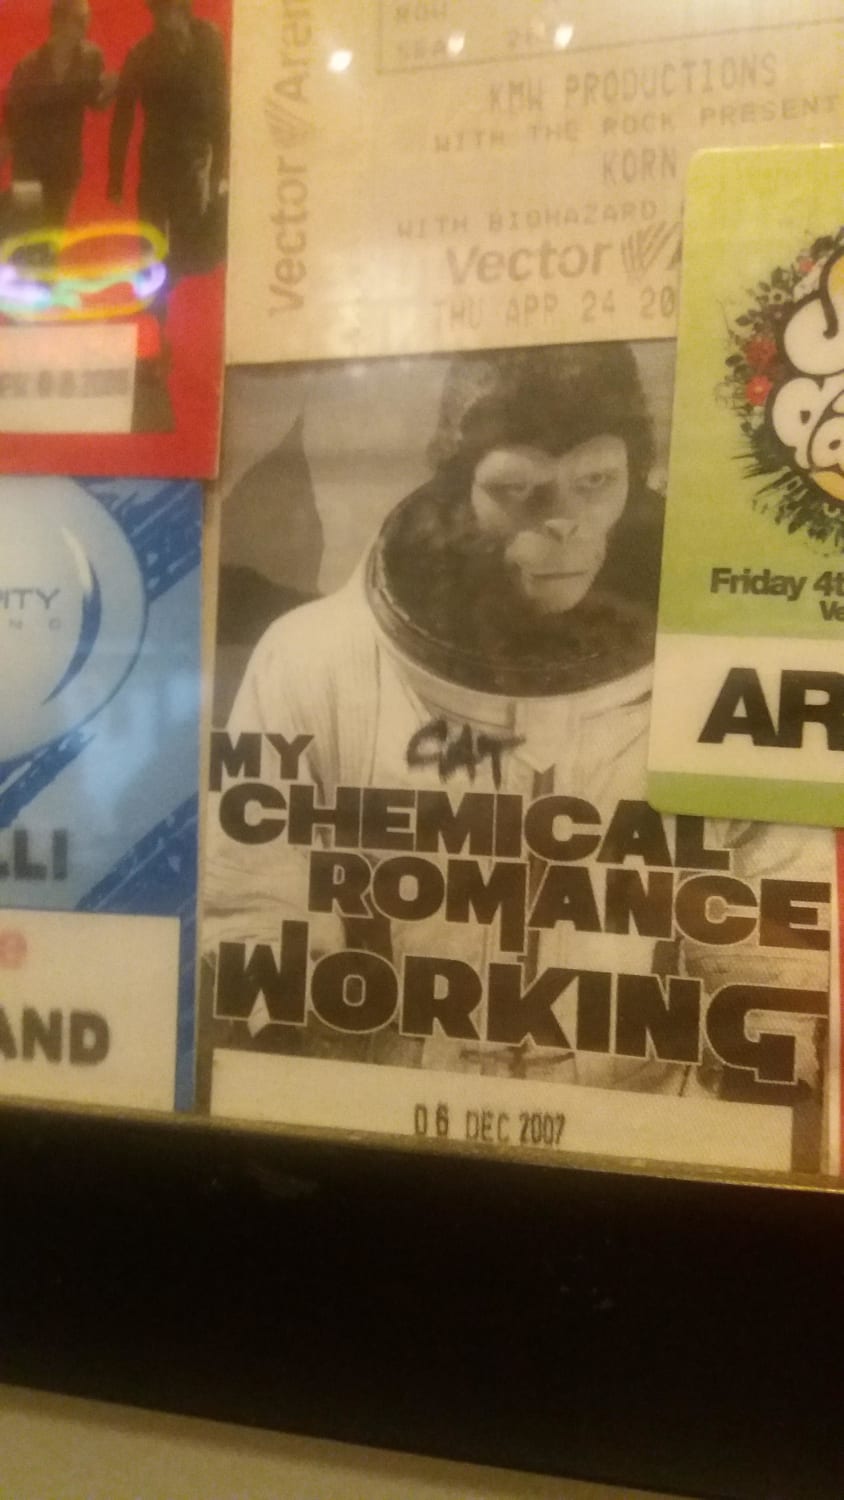 Hello everyone, this has been wracking my brain for a while. Does anyone else remember the part of the My Chemical Romance visual universe that included an astronaut chimpanzee/monkey? I can't find anyone else talking about this, it might have just been some New Zealand promotional thing.